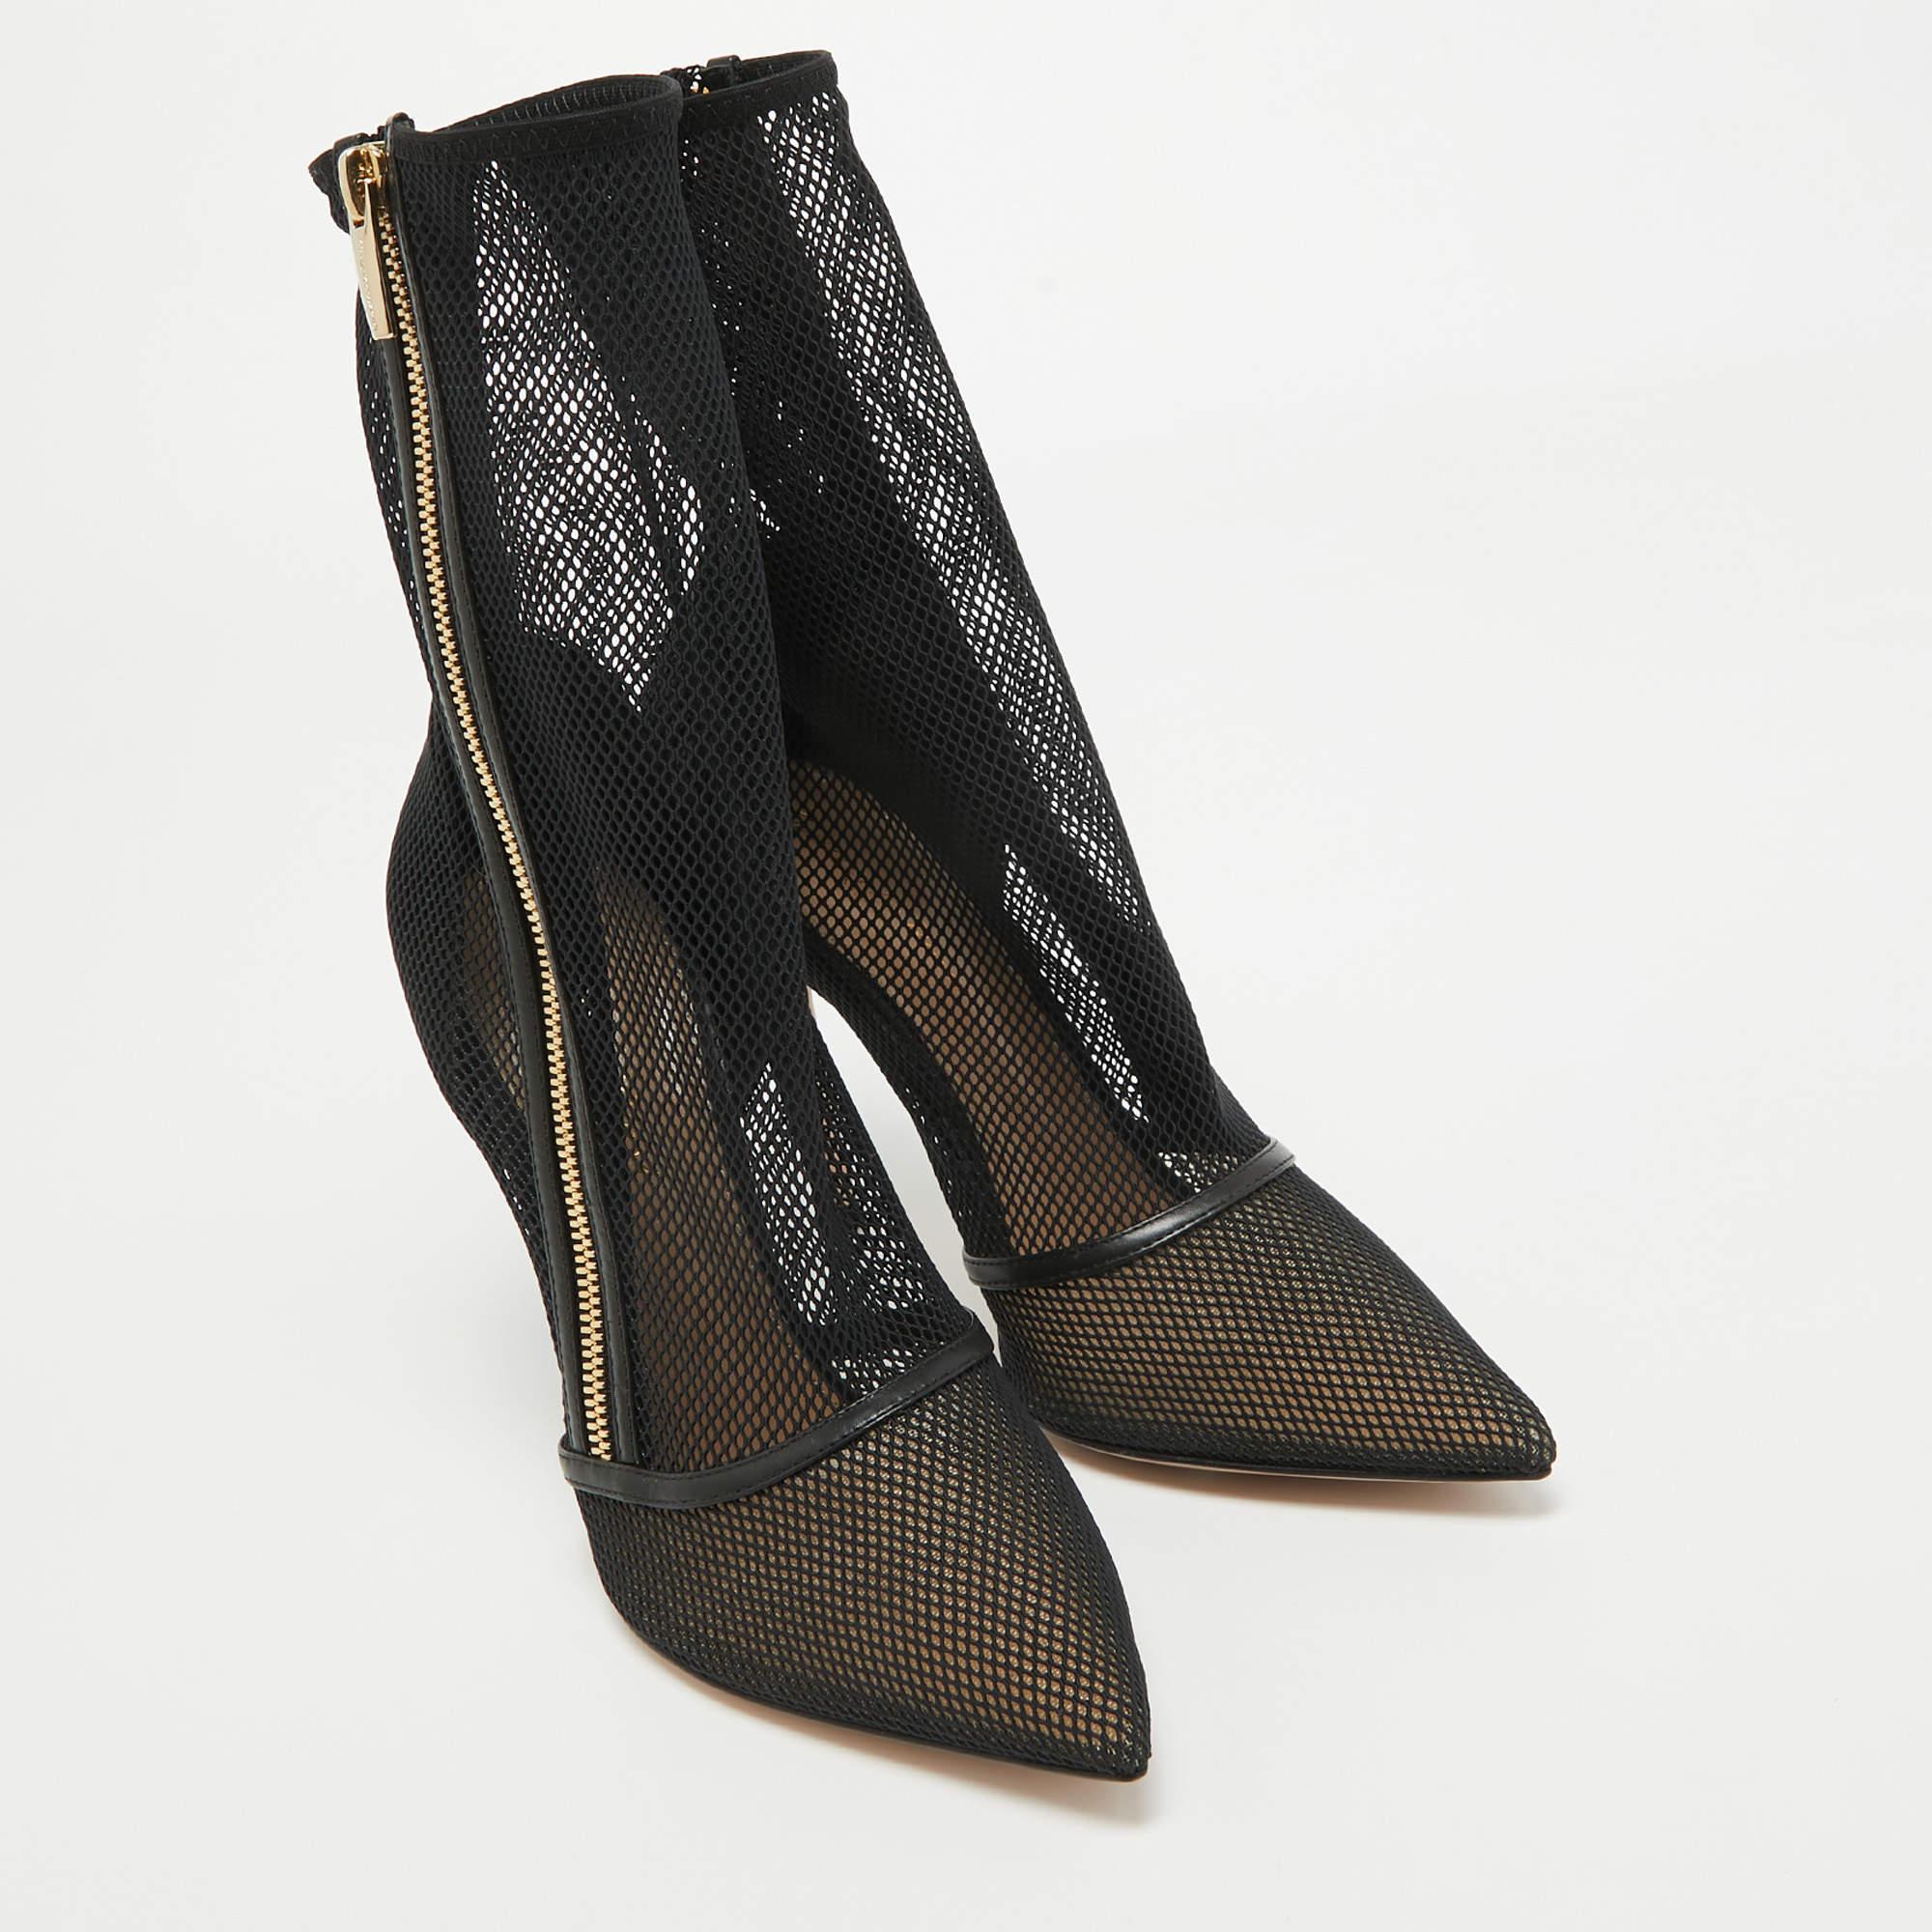 Gianvito Rossi Black Mesh and Leather Pointed Toe Ankle Boots Size 38 In Good Condition For Sale In Dubai, Al Qouz 2